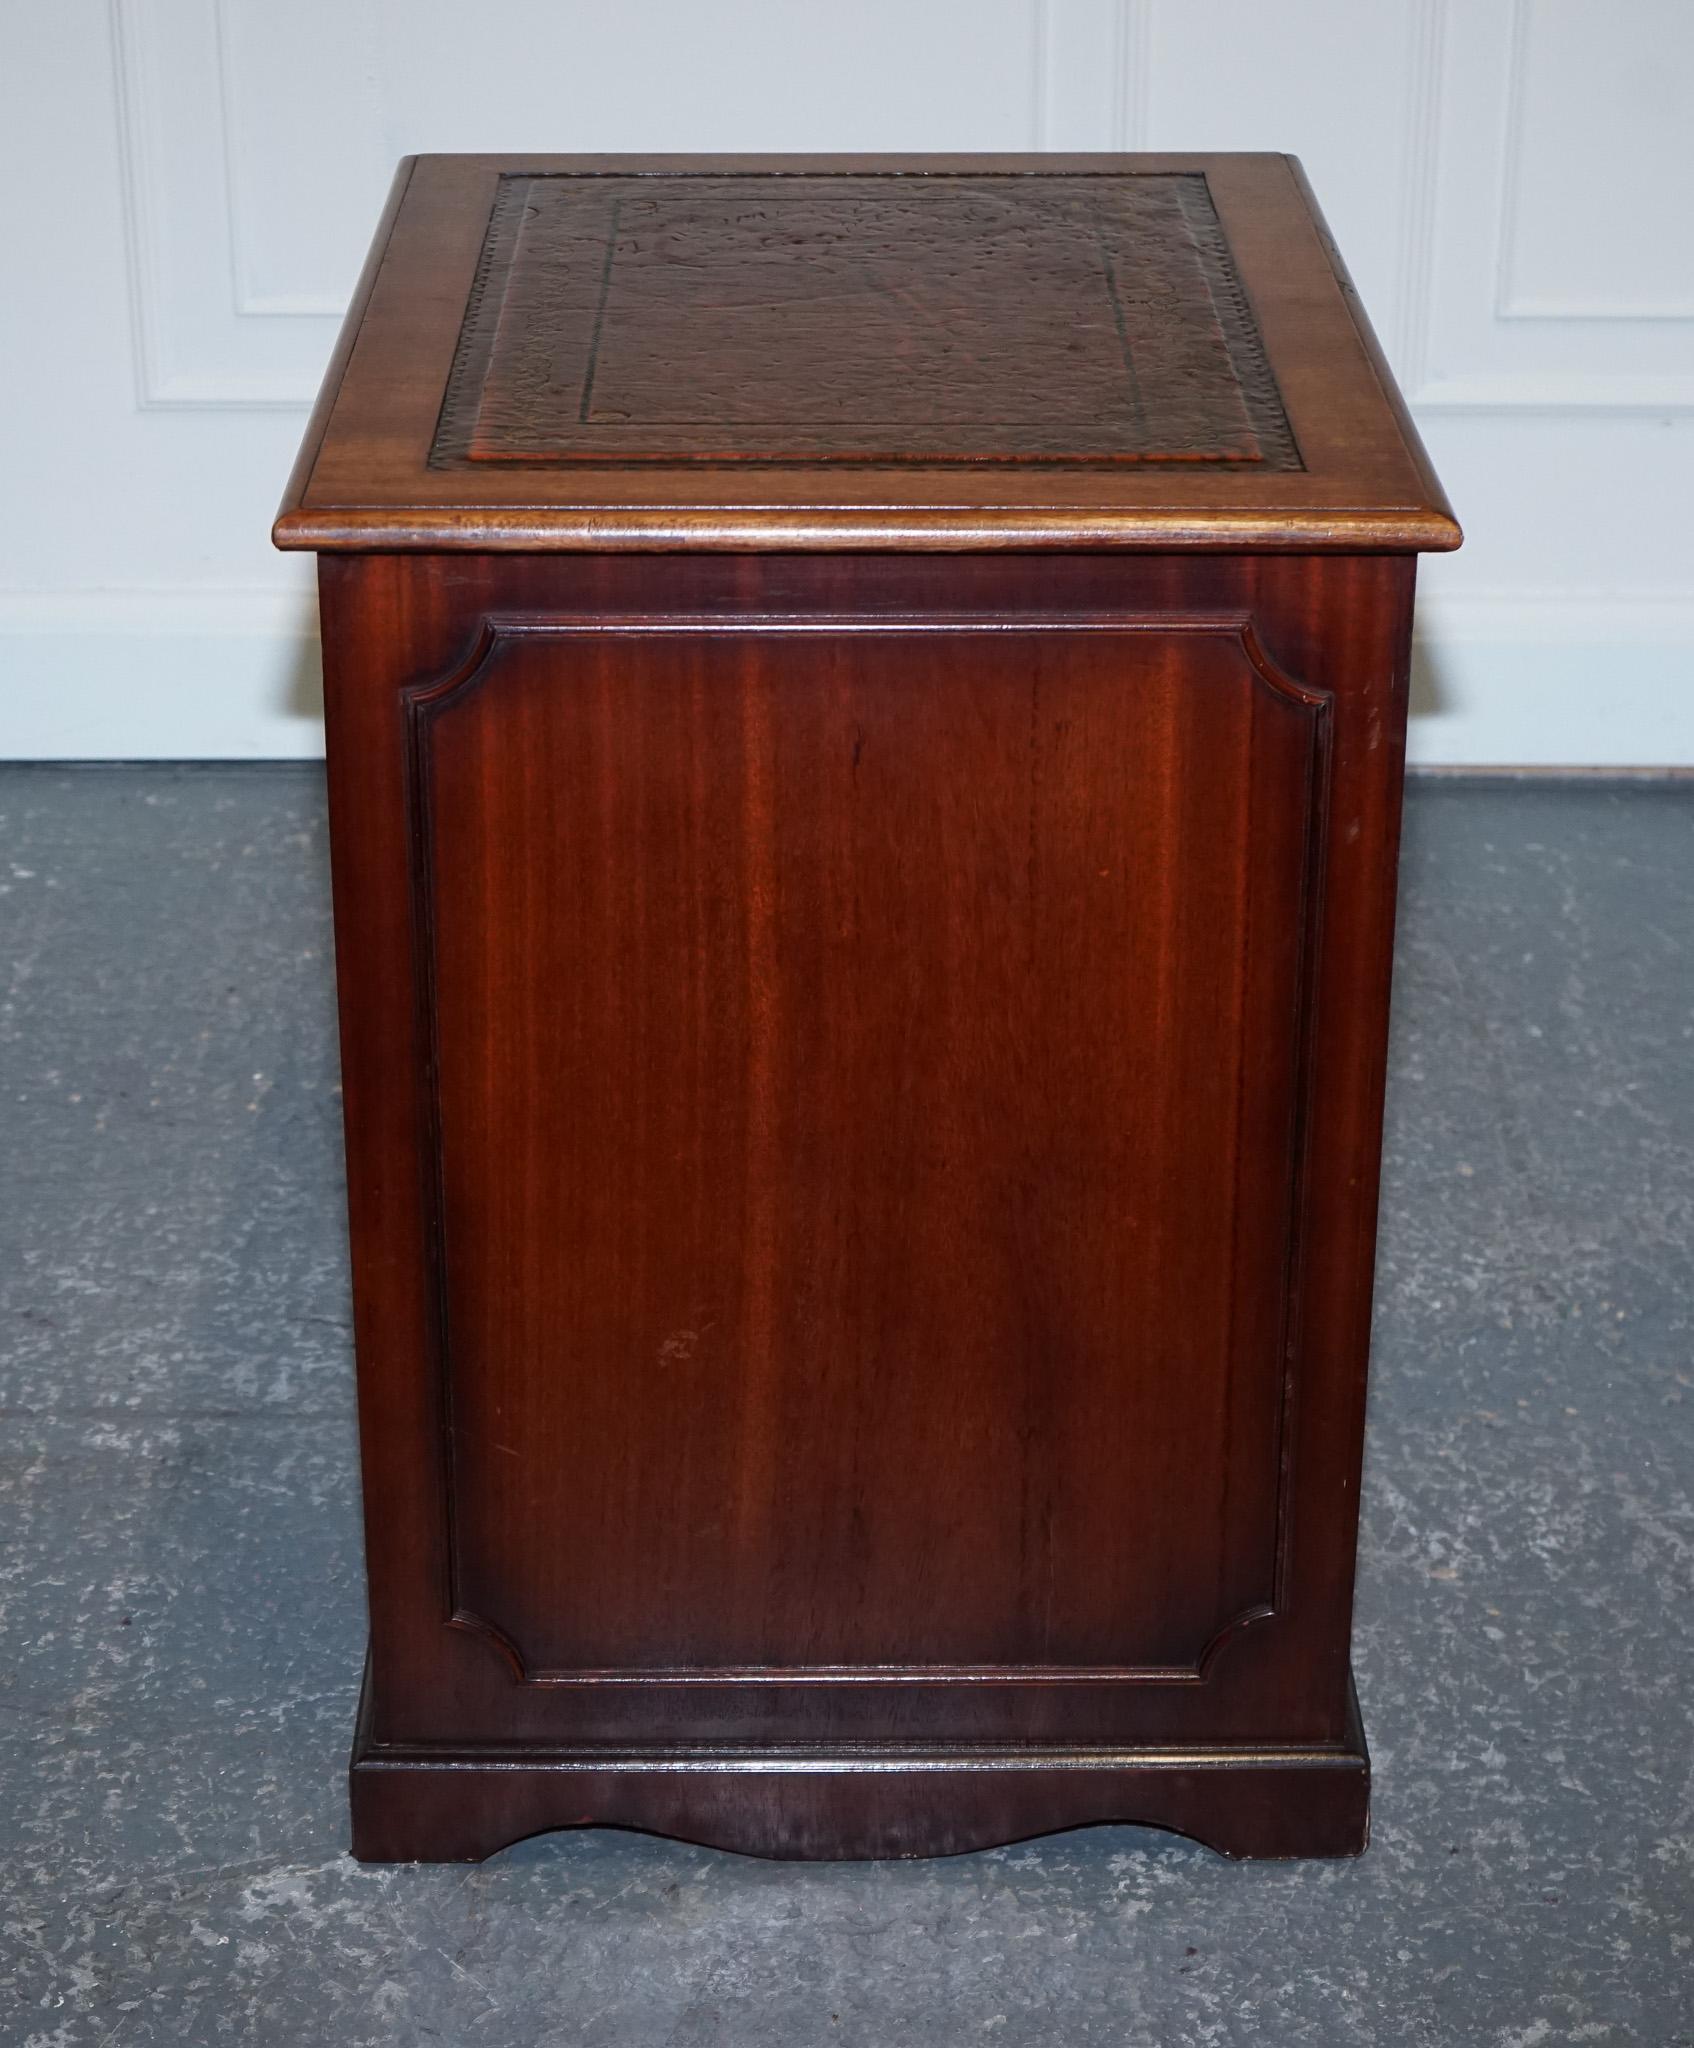 Hardwood GOLD EMBOSSED BROWN LEATHER TOP FILLING CABiNET - MATCHING DESK AVAILABLE For Sale